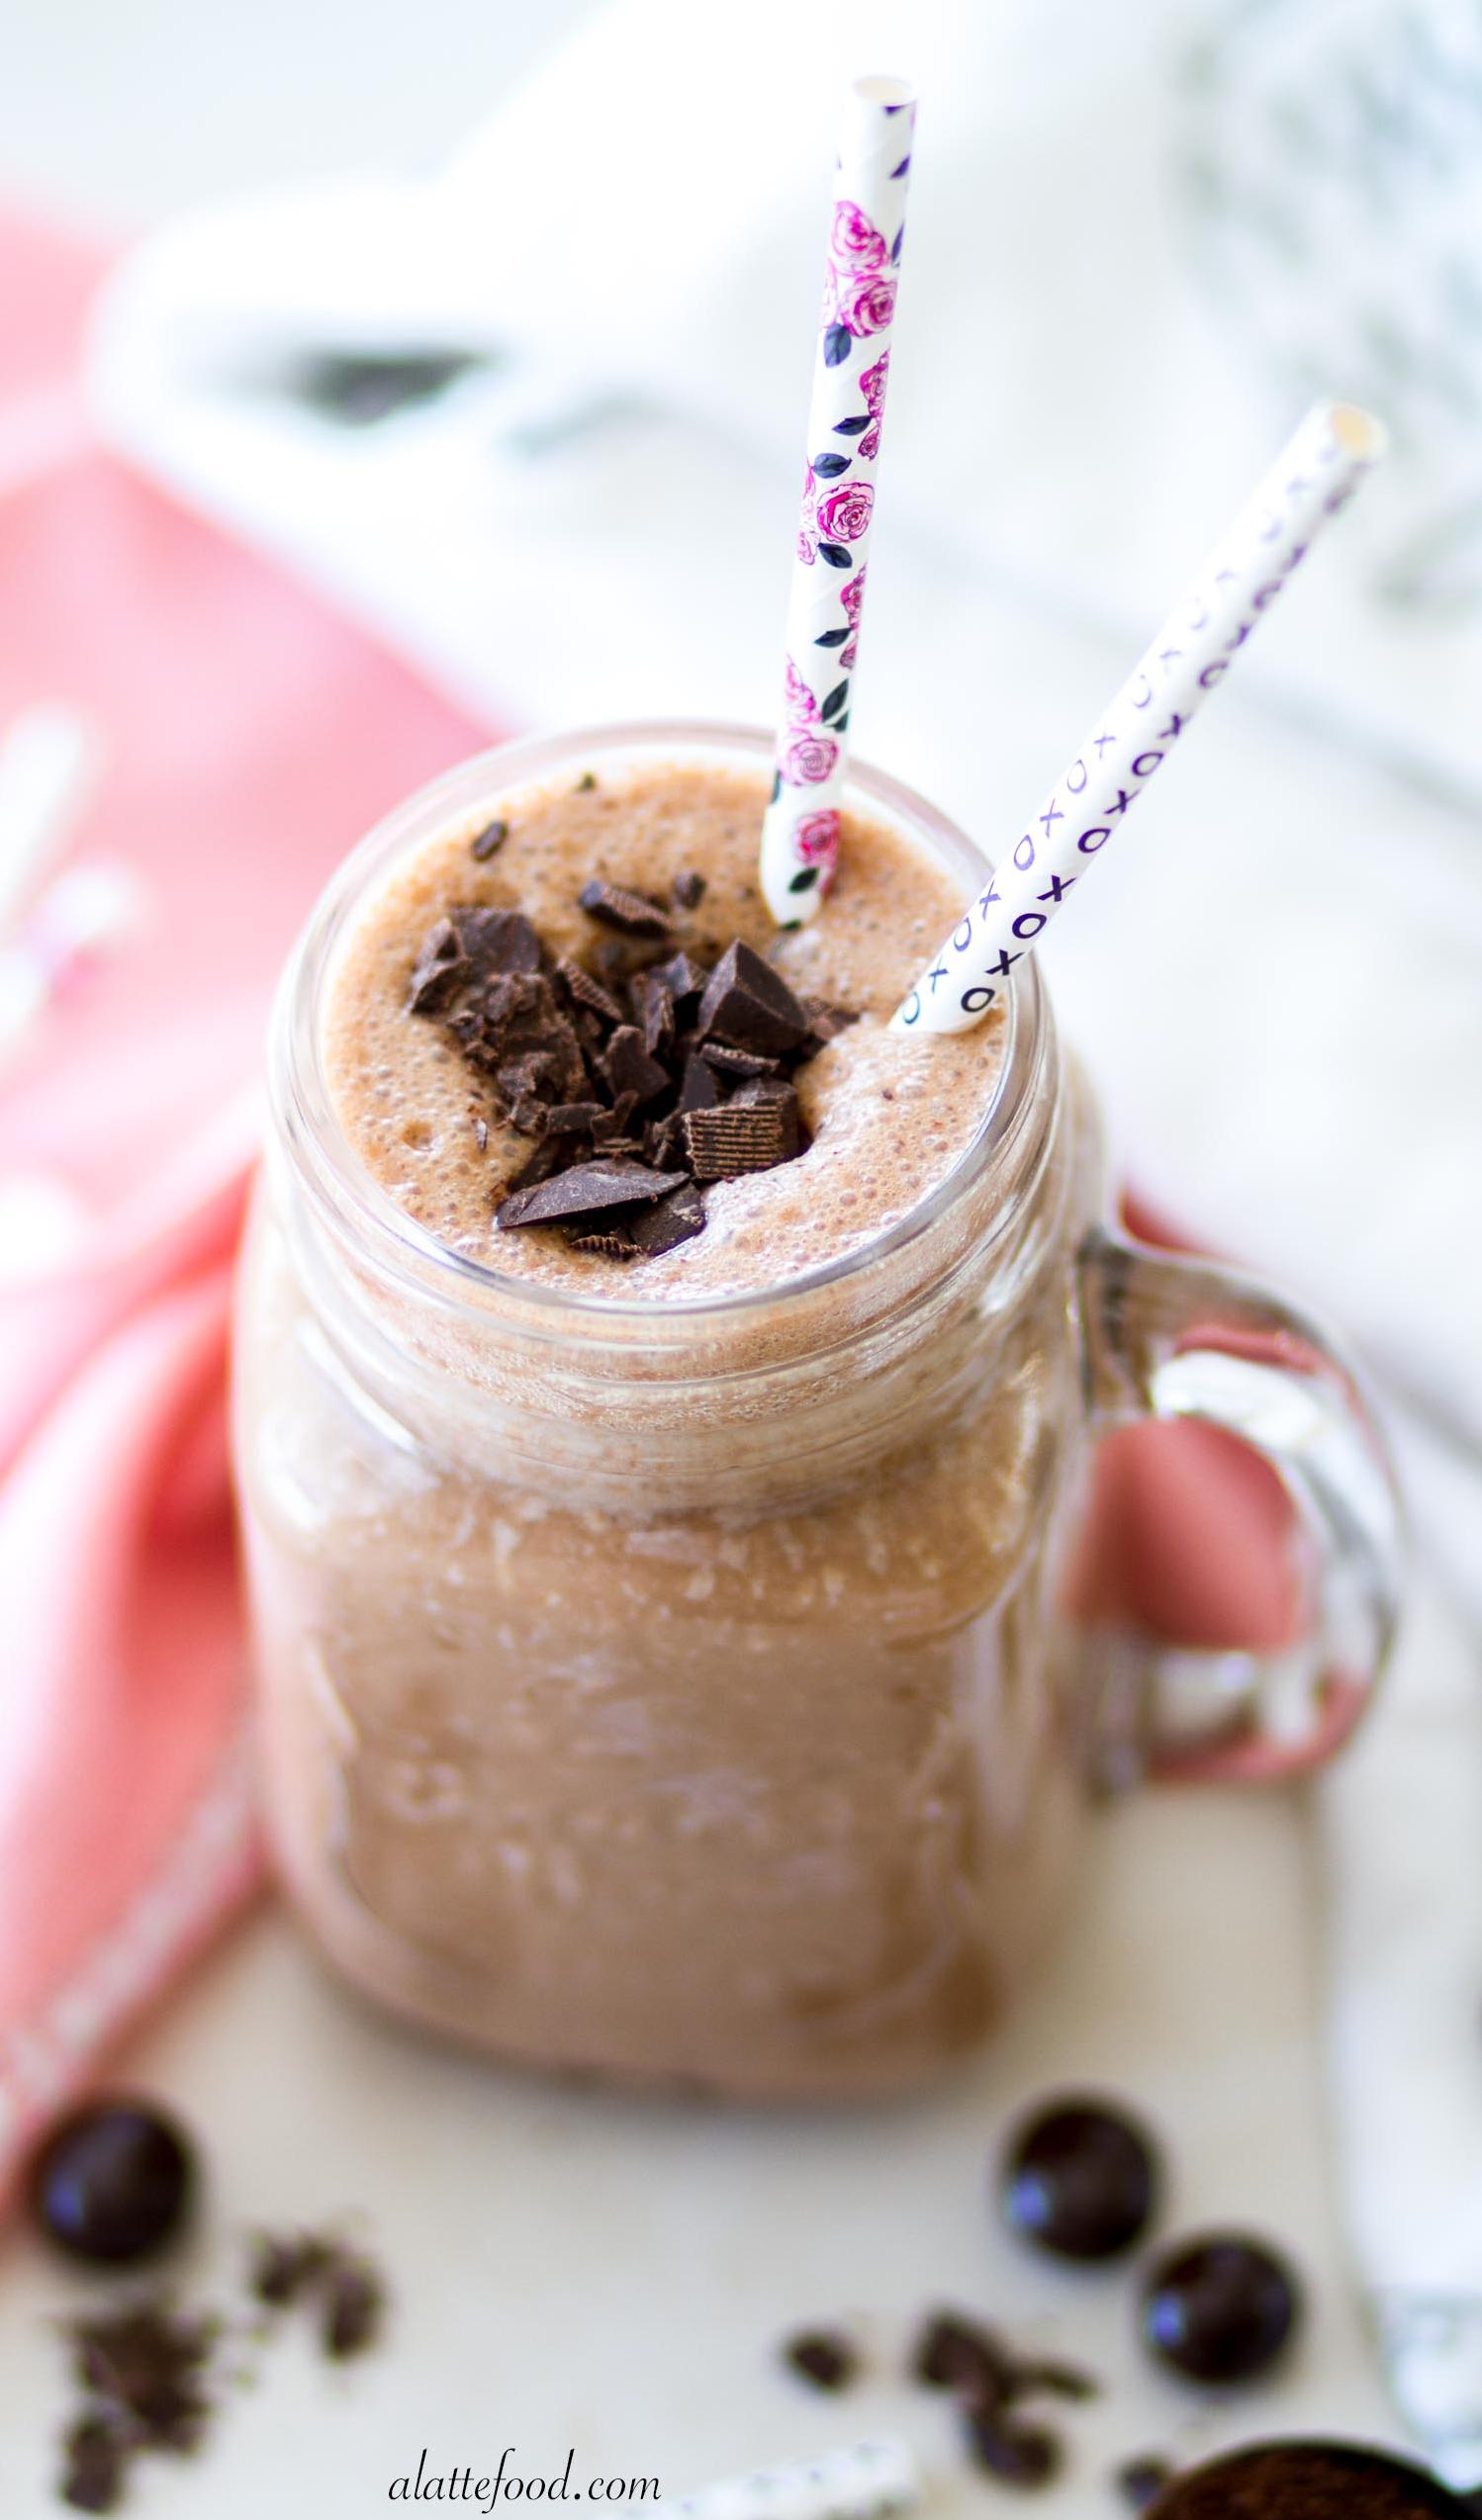  The perfect way to beat the heat - this delicious, frosty mocha smoothie.